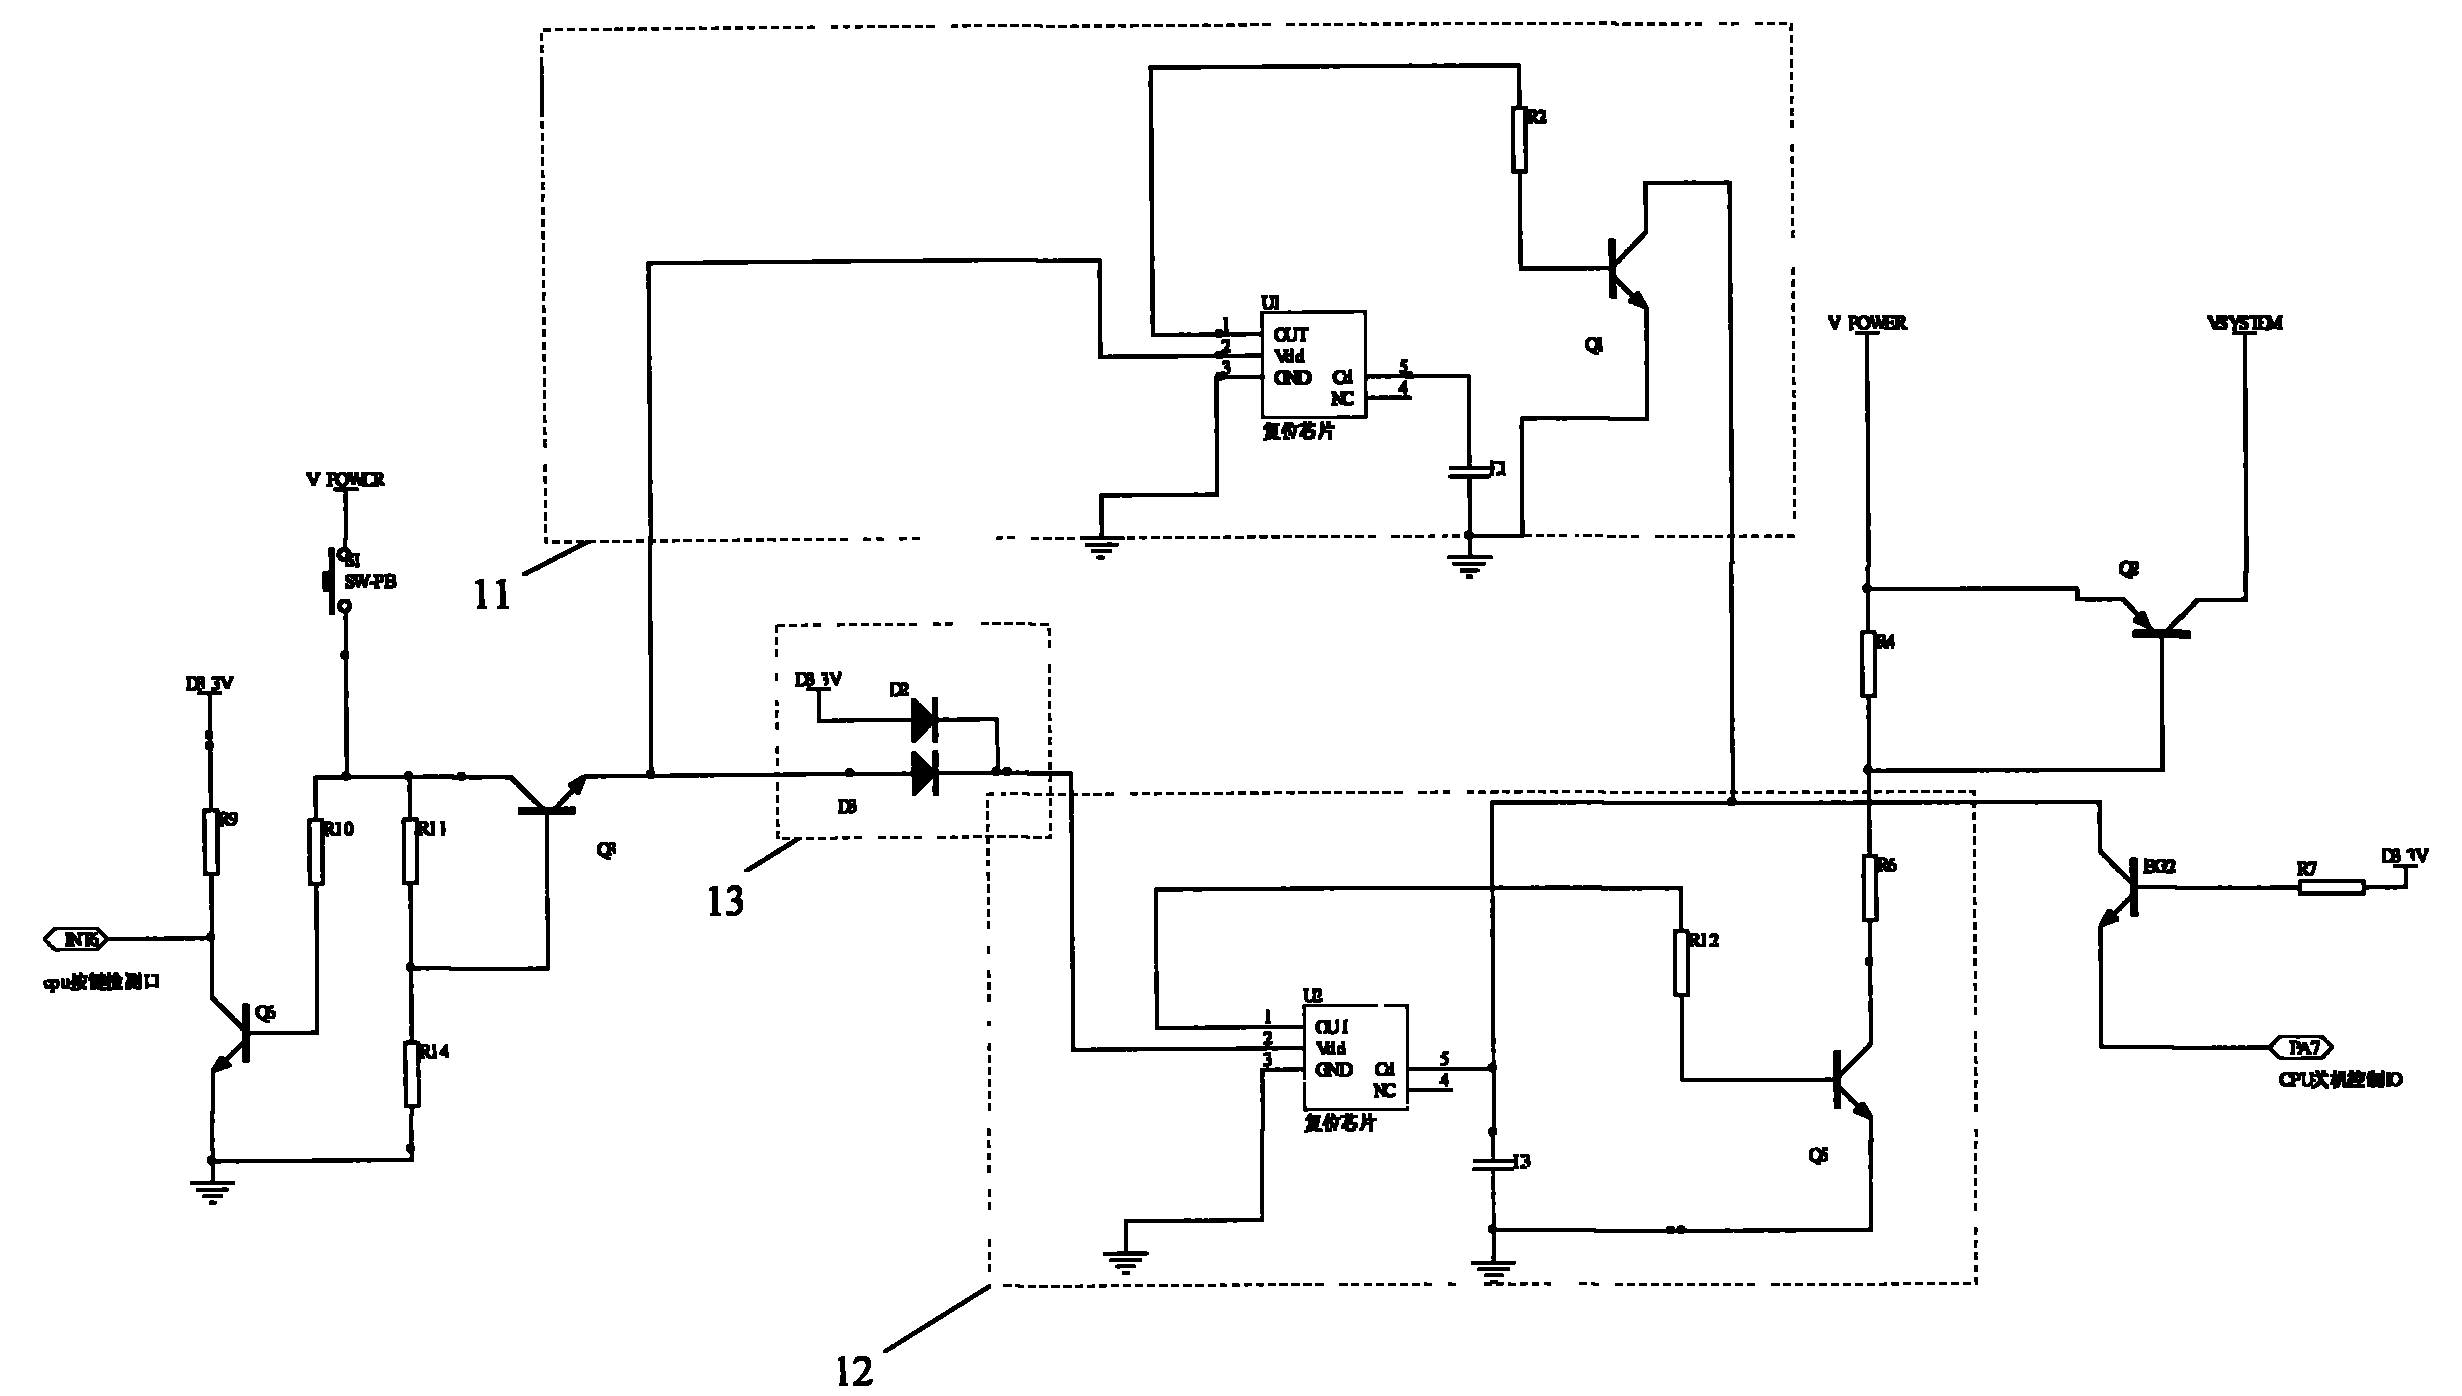 Controllable on/off circuit